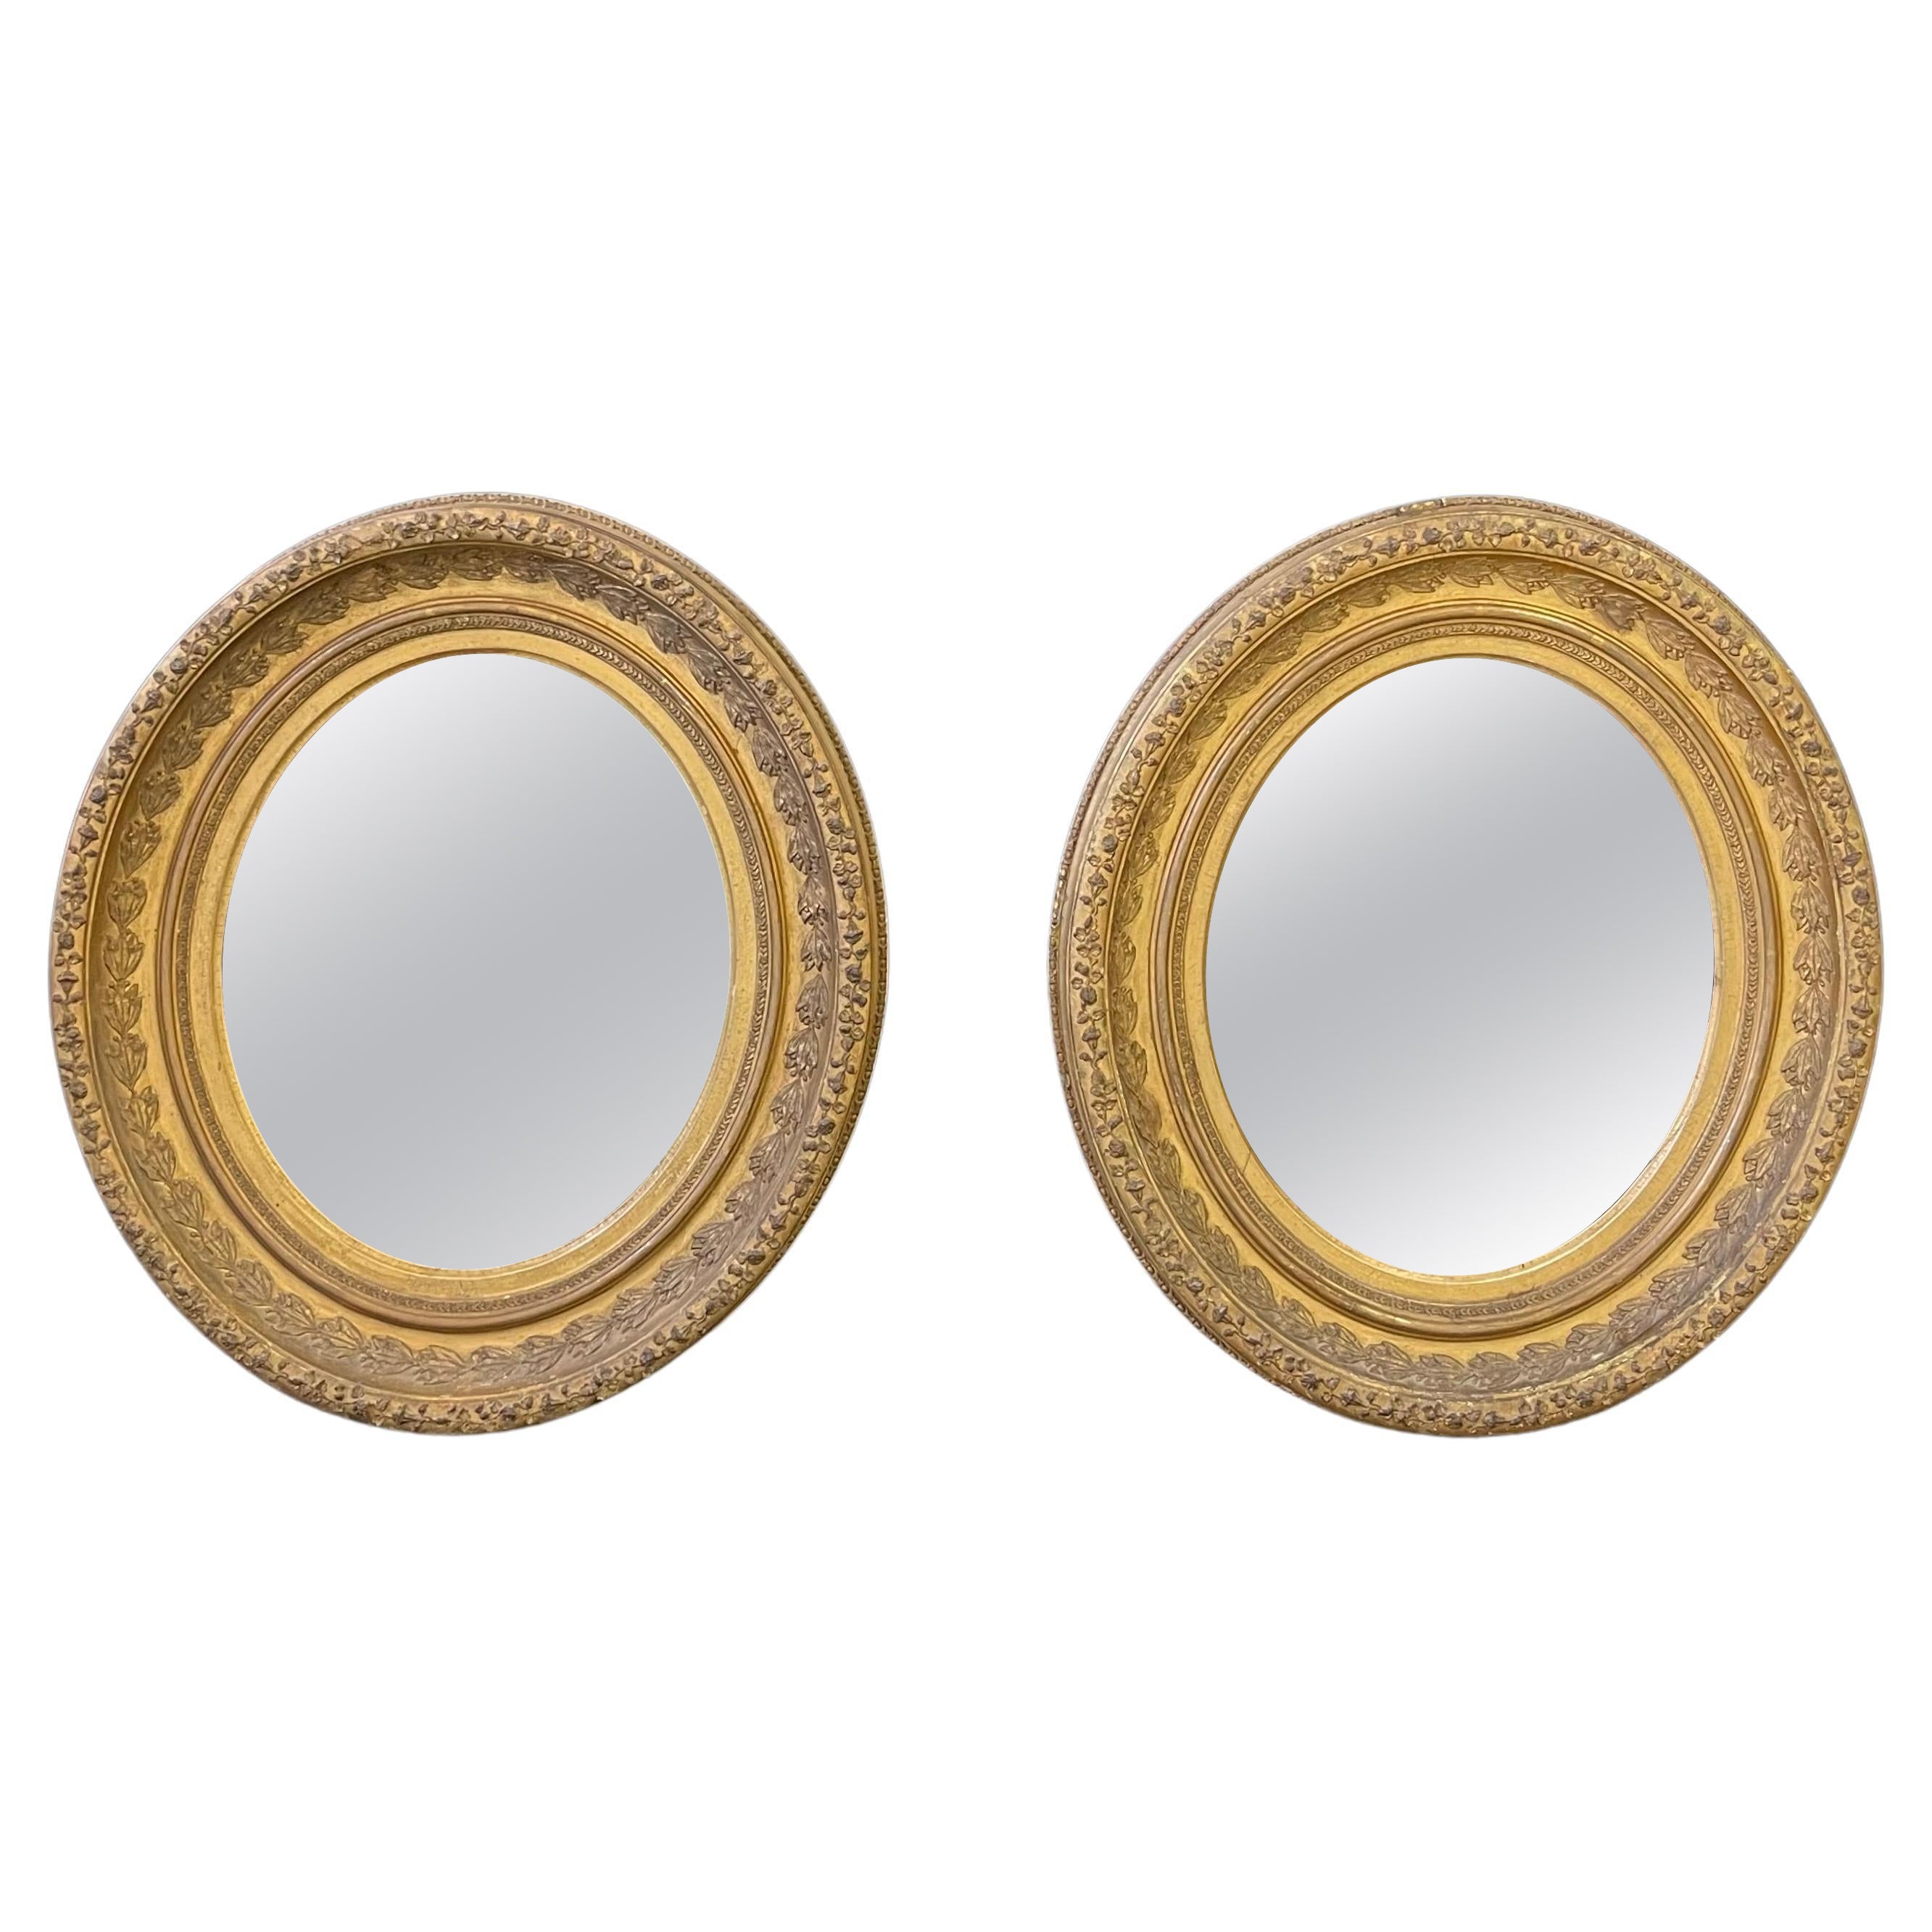 Pair of English Oval Gilt Mirrors